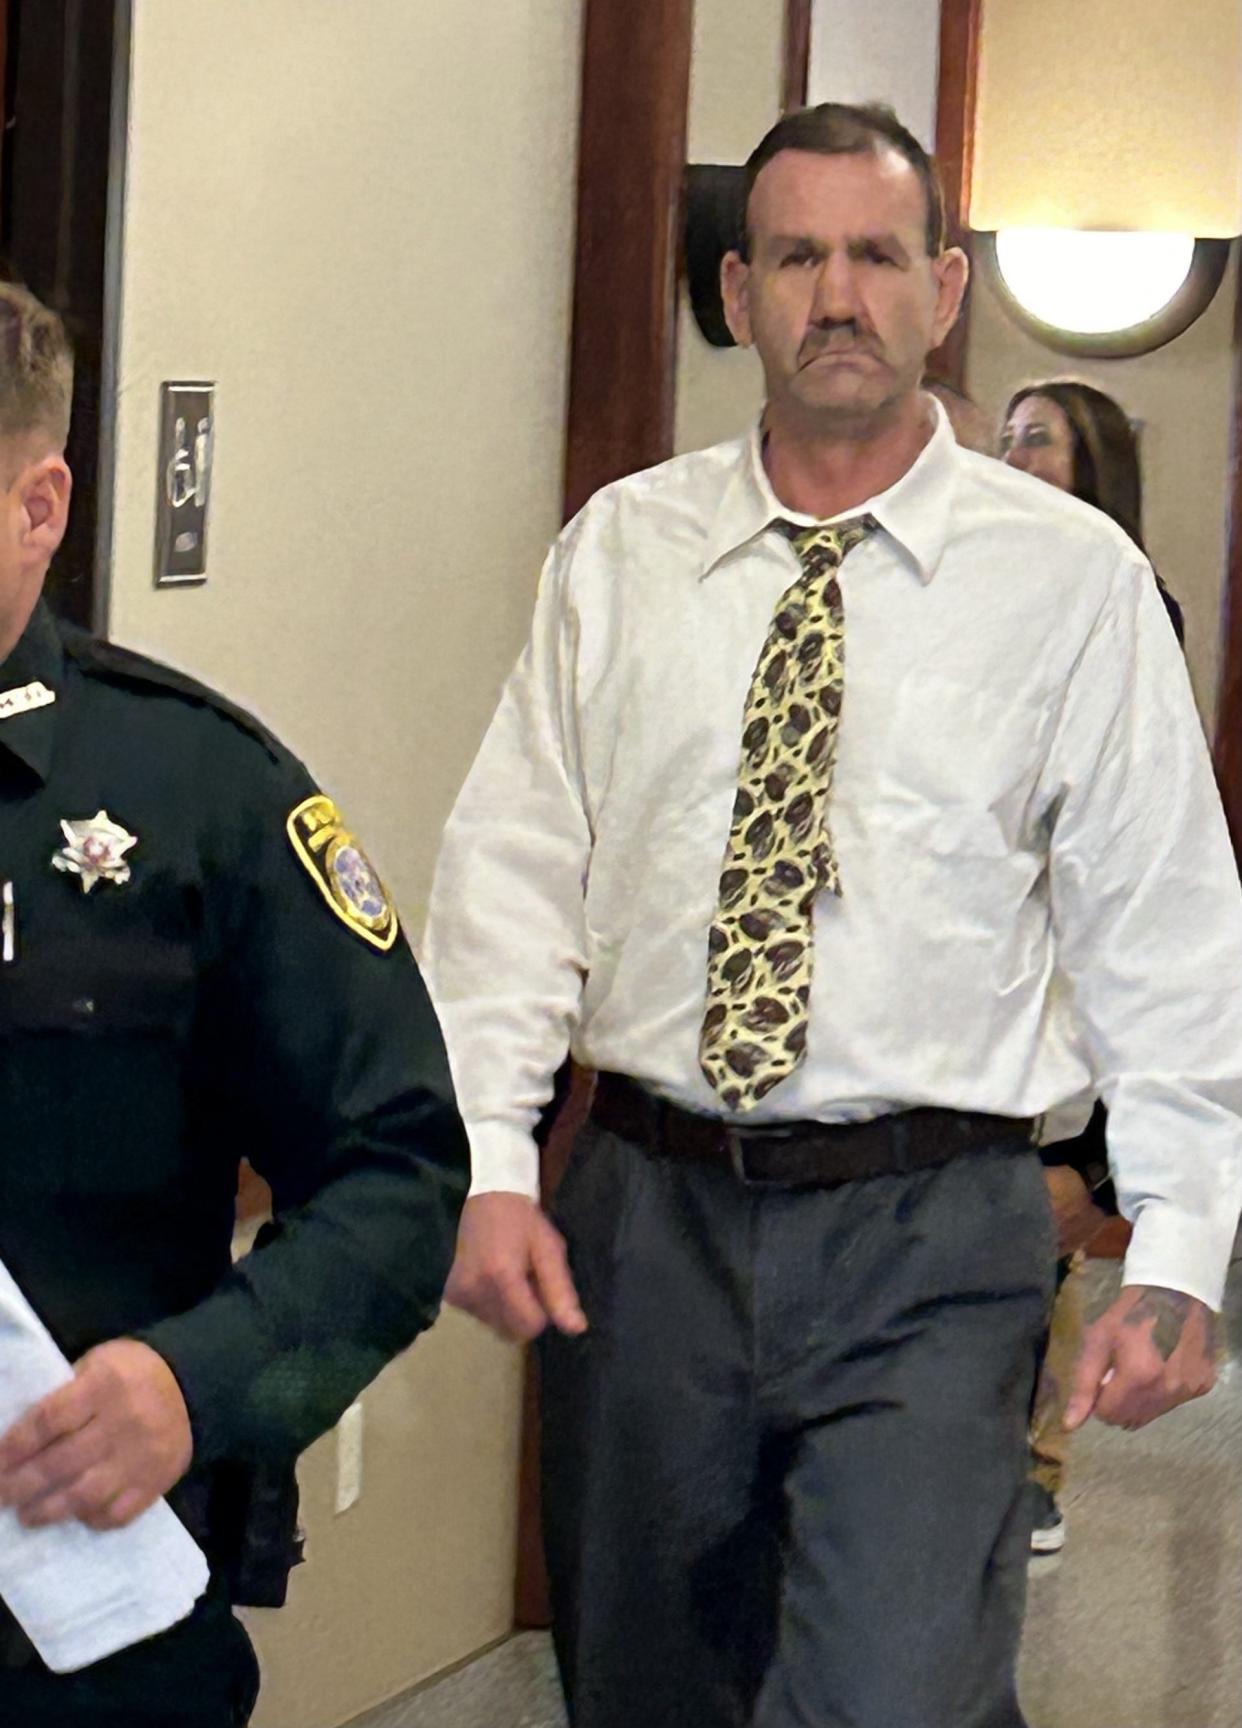 Murder defendant Larry Doil Sanders is escorted from the courtroom during a break Tuesday in his nonjury trial at the Pontotoc County Courthouse in Ada.